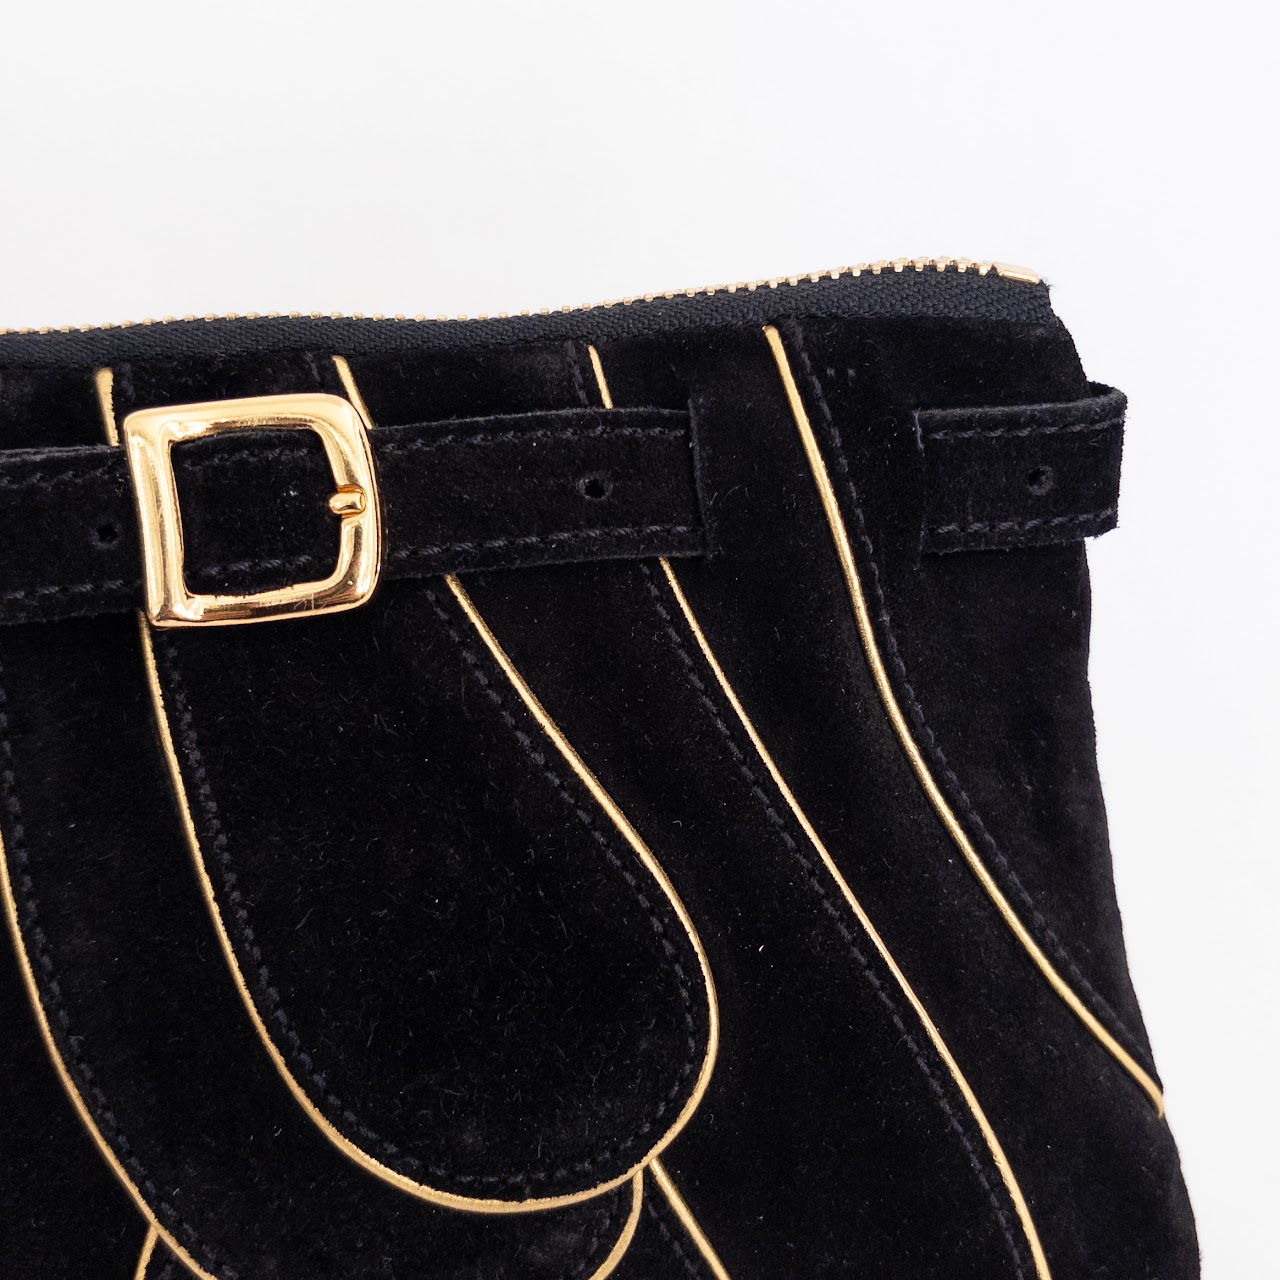 Chloé Highlighted Suede Clutch